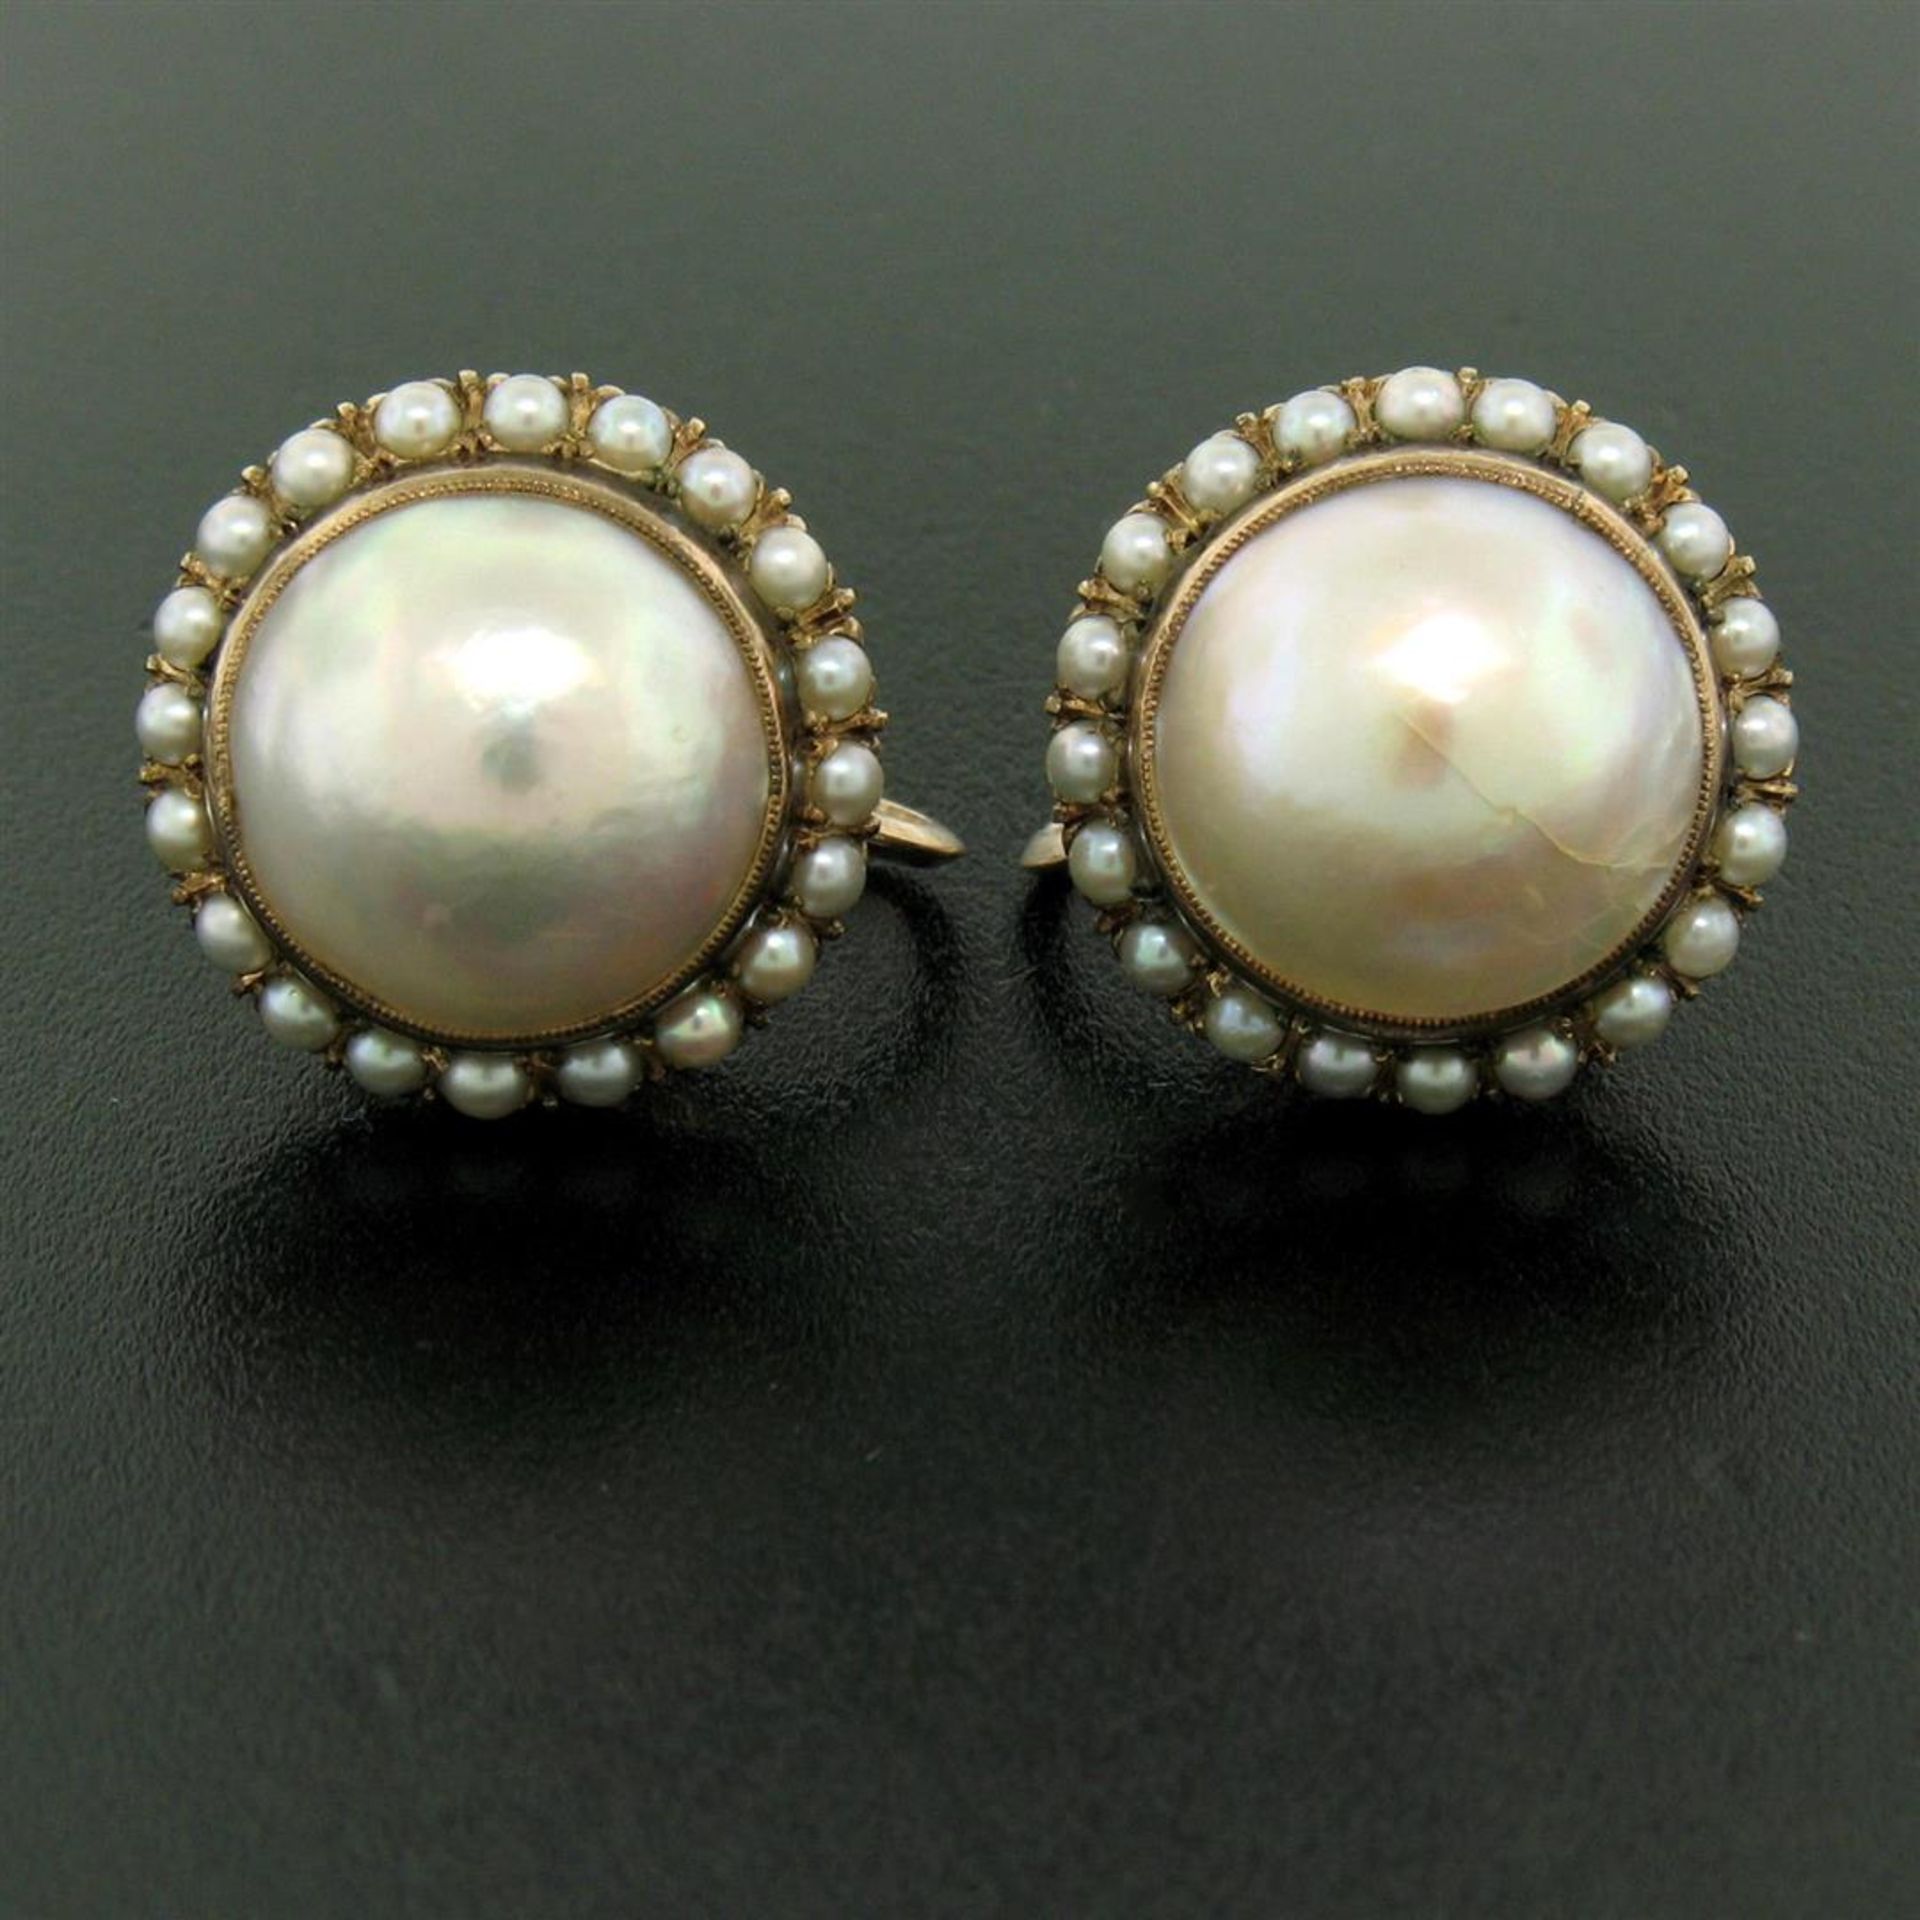 Antique Victorian 10K Rose Gold Bezel Mabe Prong Seed Pearl Ring & Earrings Set - Image 7 of 9